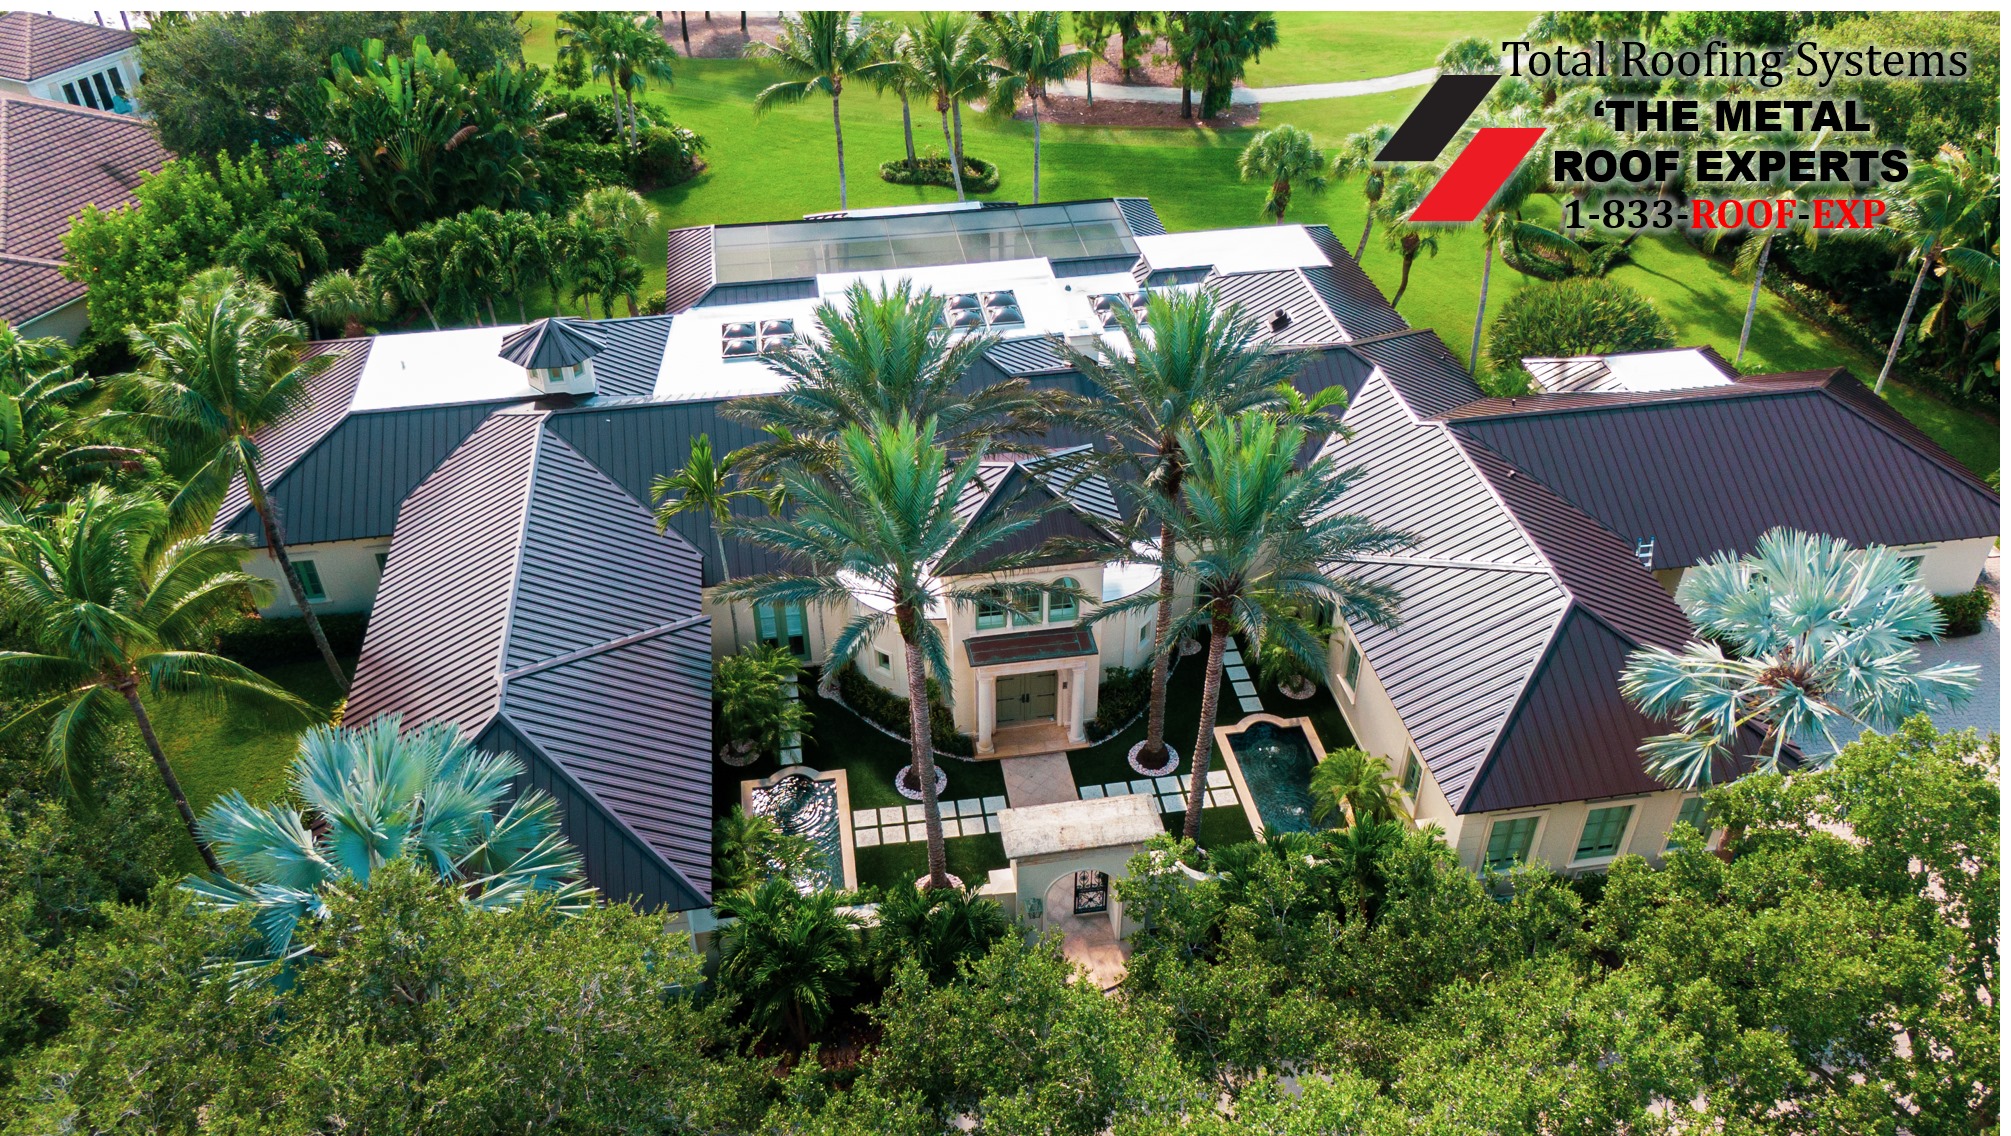 Total Roofing Systems - The Metal Roof Experts Inc. - Photo Gallery